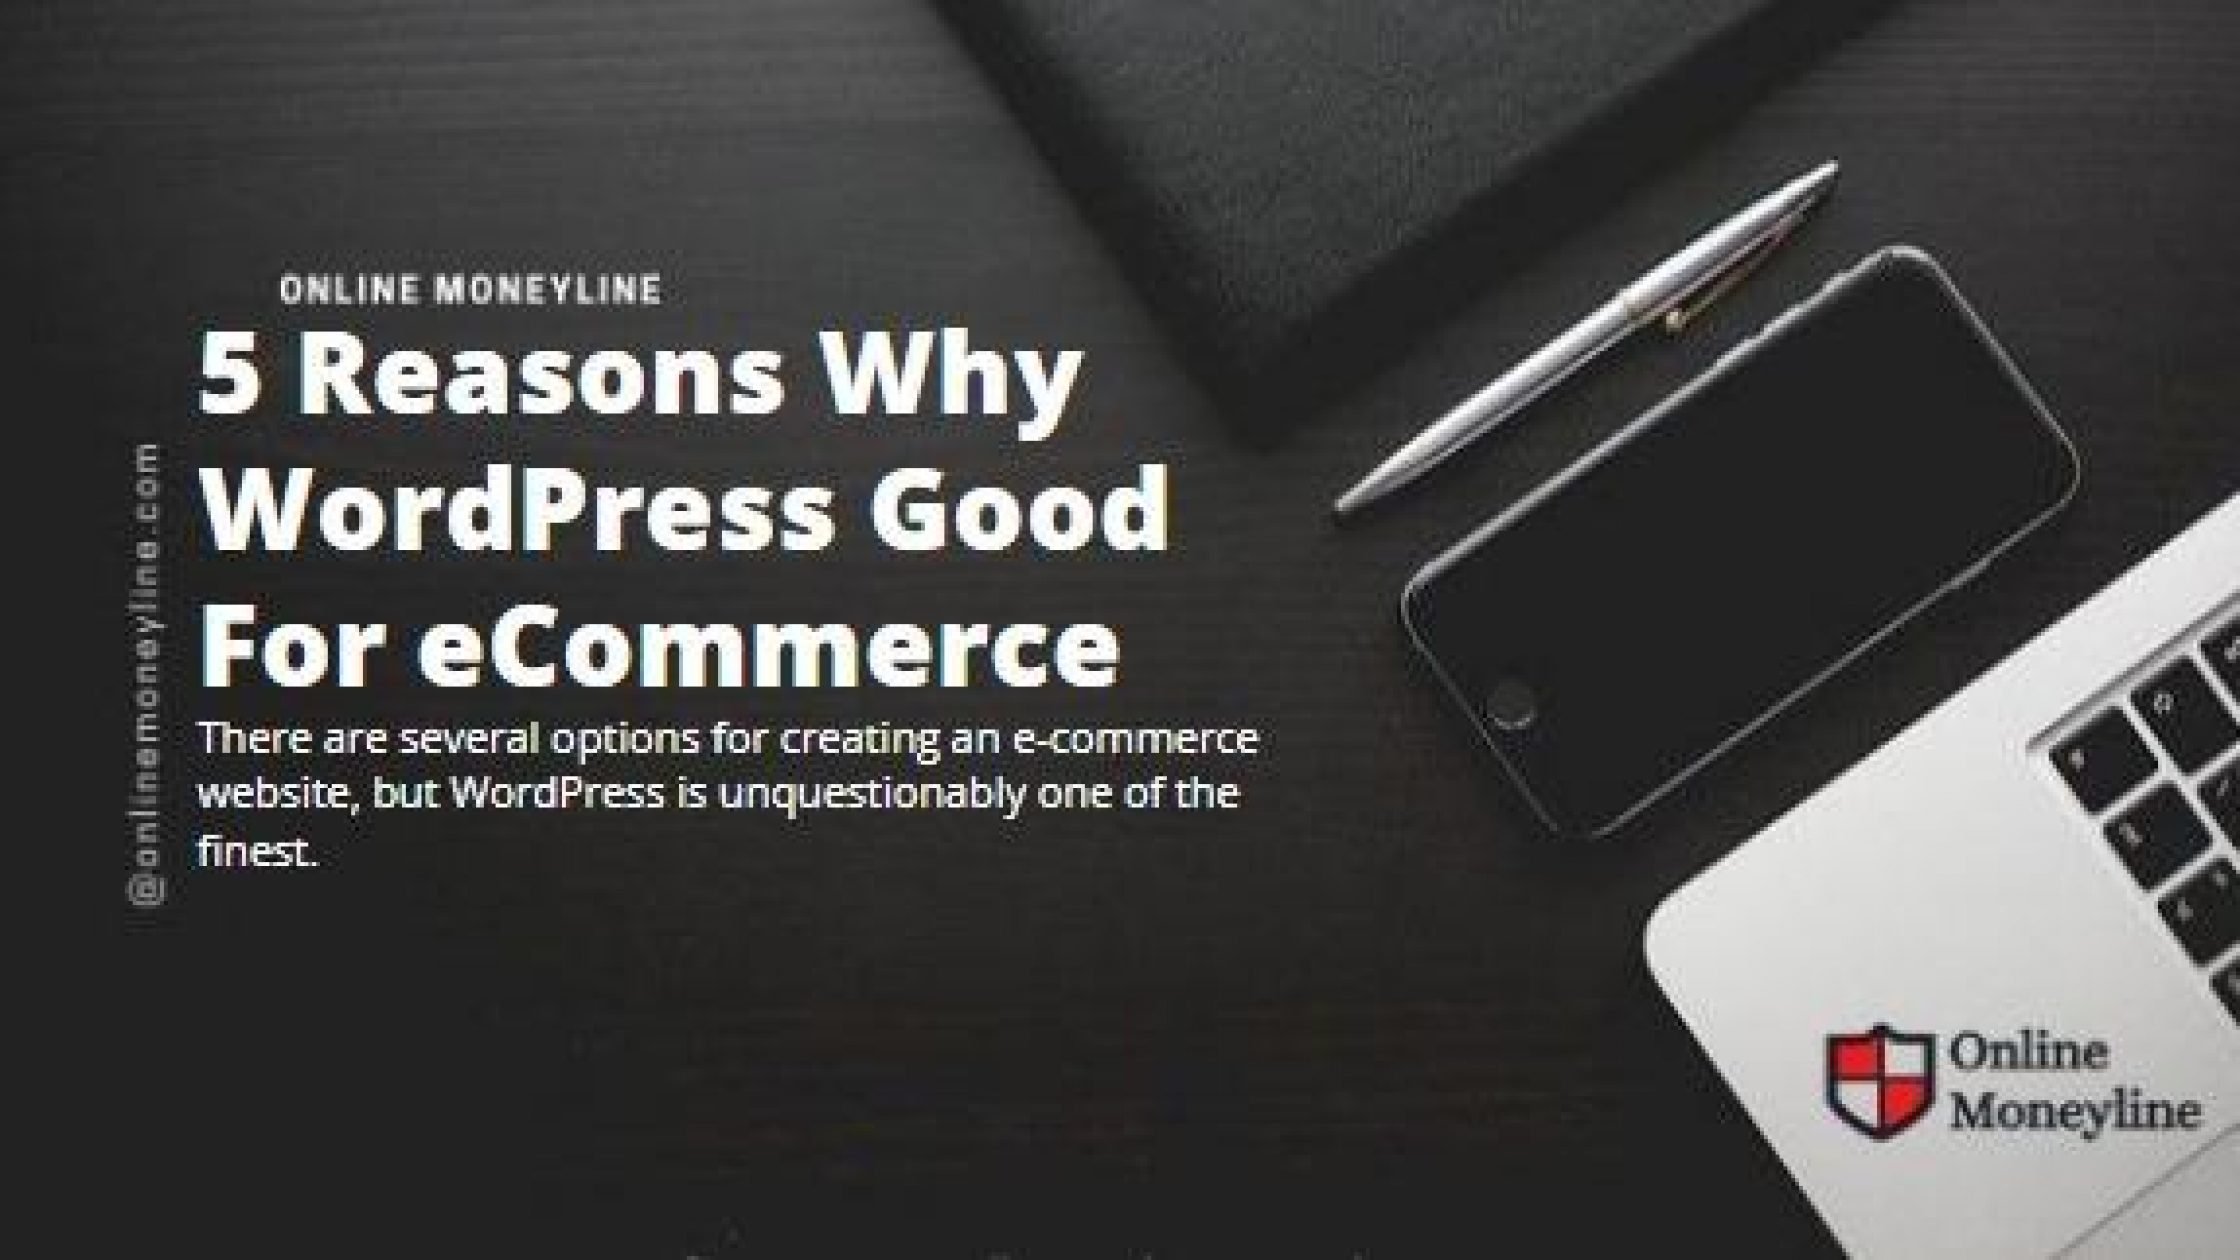 5 Reasons Why WordPress Good For eCommerce